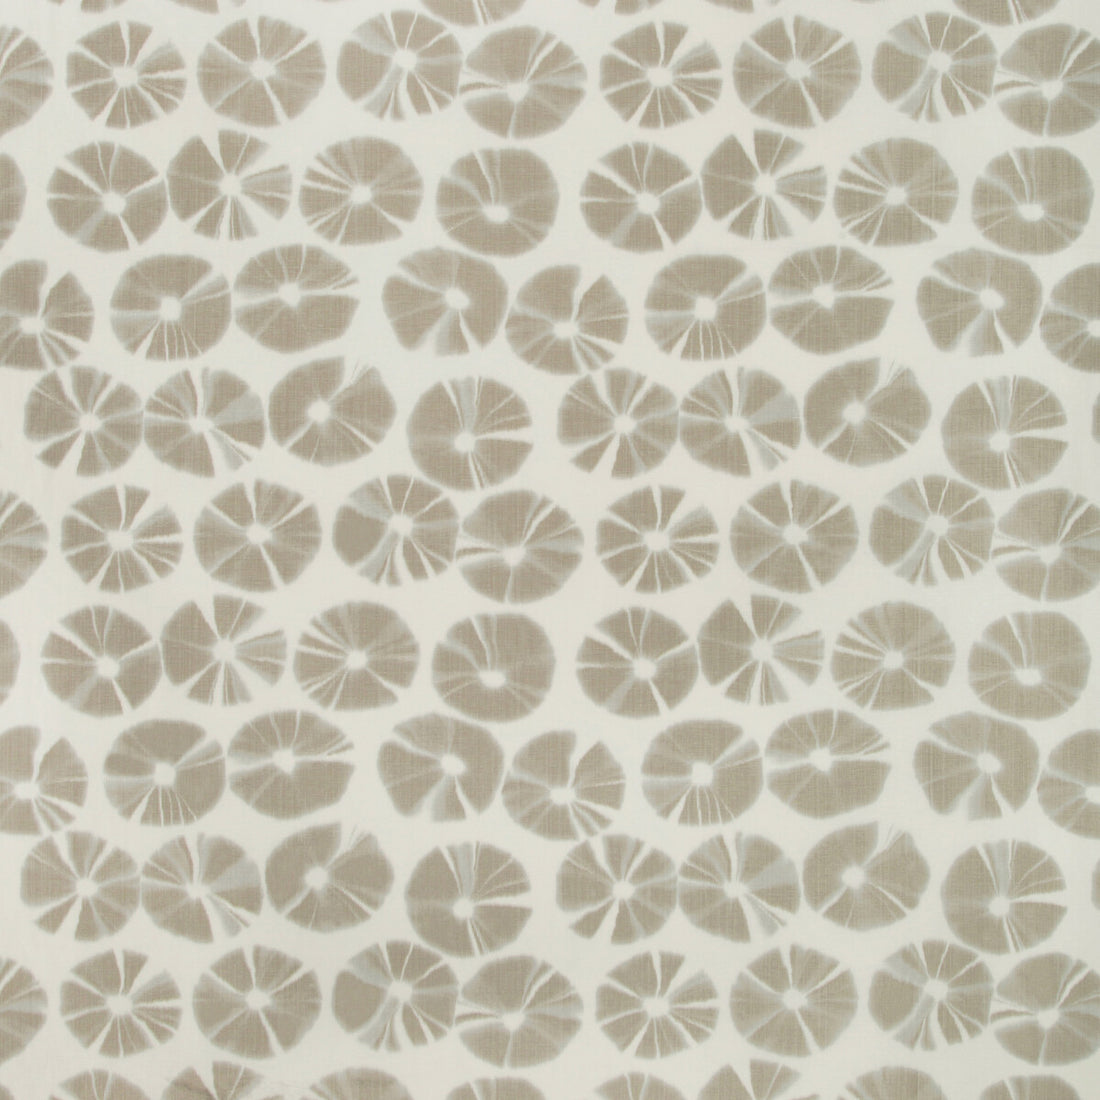 Echino fabric in fawn color - pattern ECHINO.16.0 - by Kravet Couture in the Terrae Prints collection